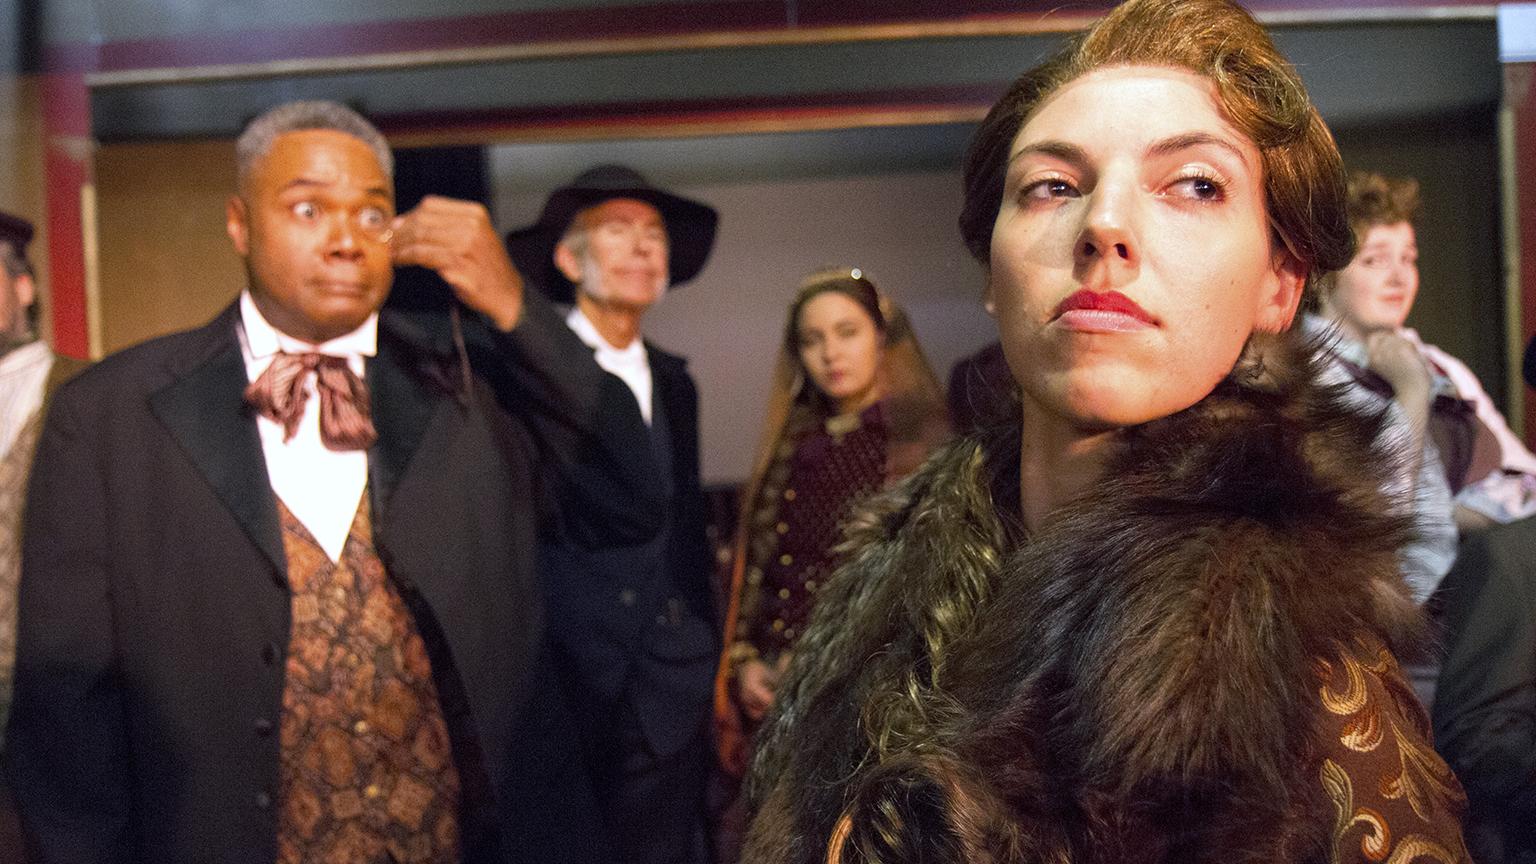 Alice Nutting (Sarah Myers, right) storms out while the Chairman William Cartwright (Darryl Maximilian Robinson, from left) and Cedric Moncriffe (Russ Gager), Janet Conover (Anna Gallucci) and Deirdre Peregrine (Shayla Rogers) look on. (Photo by Eryn Walanka)